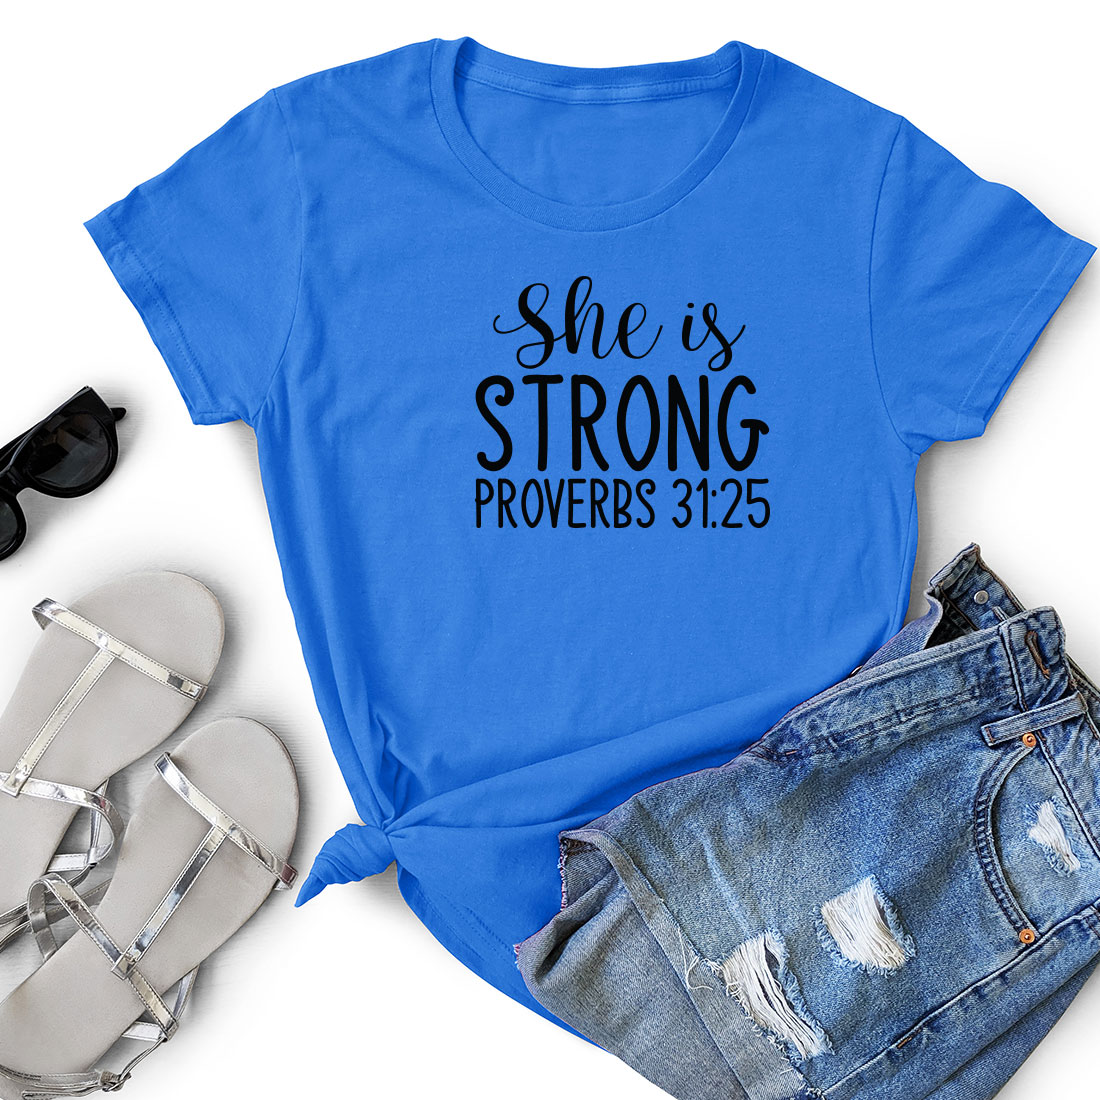 T - shirt that says she is strong provers 31 / 25.